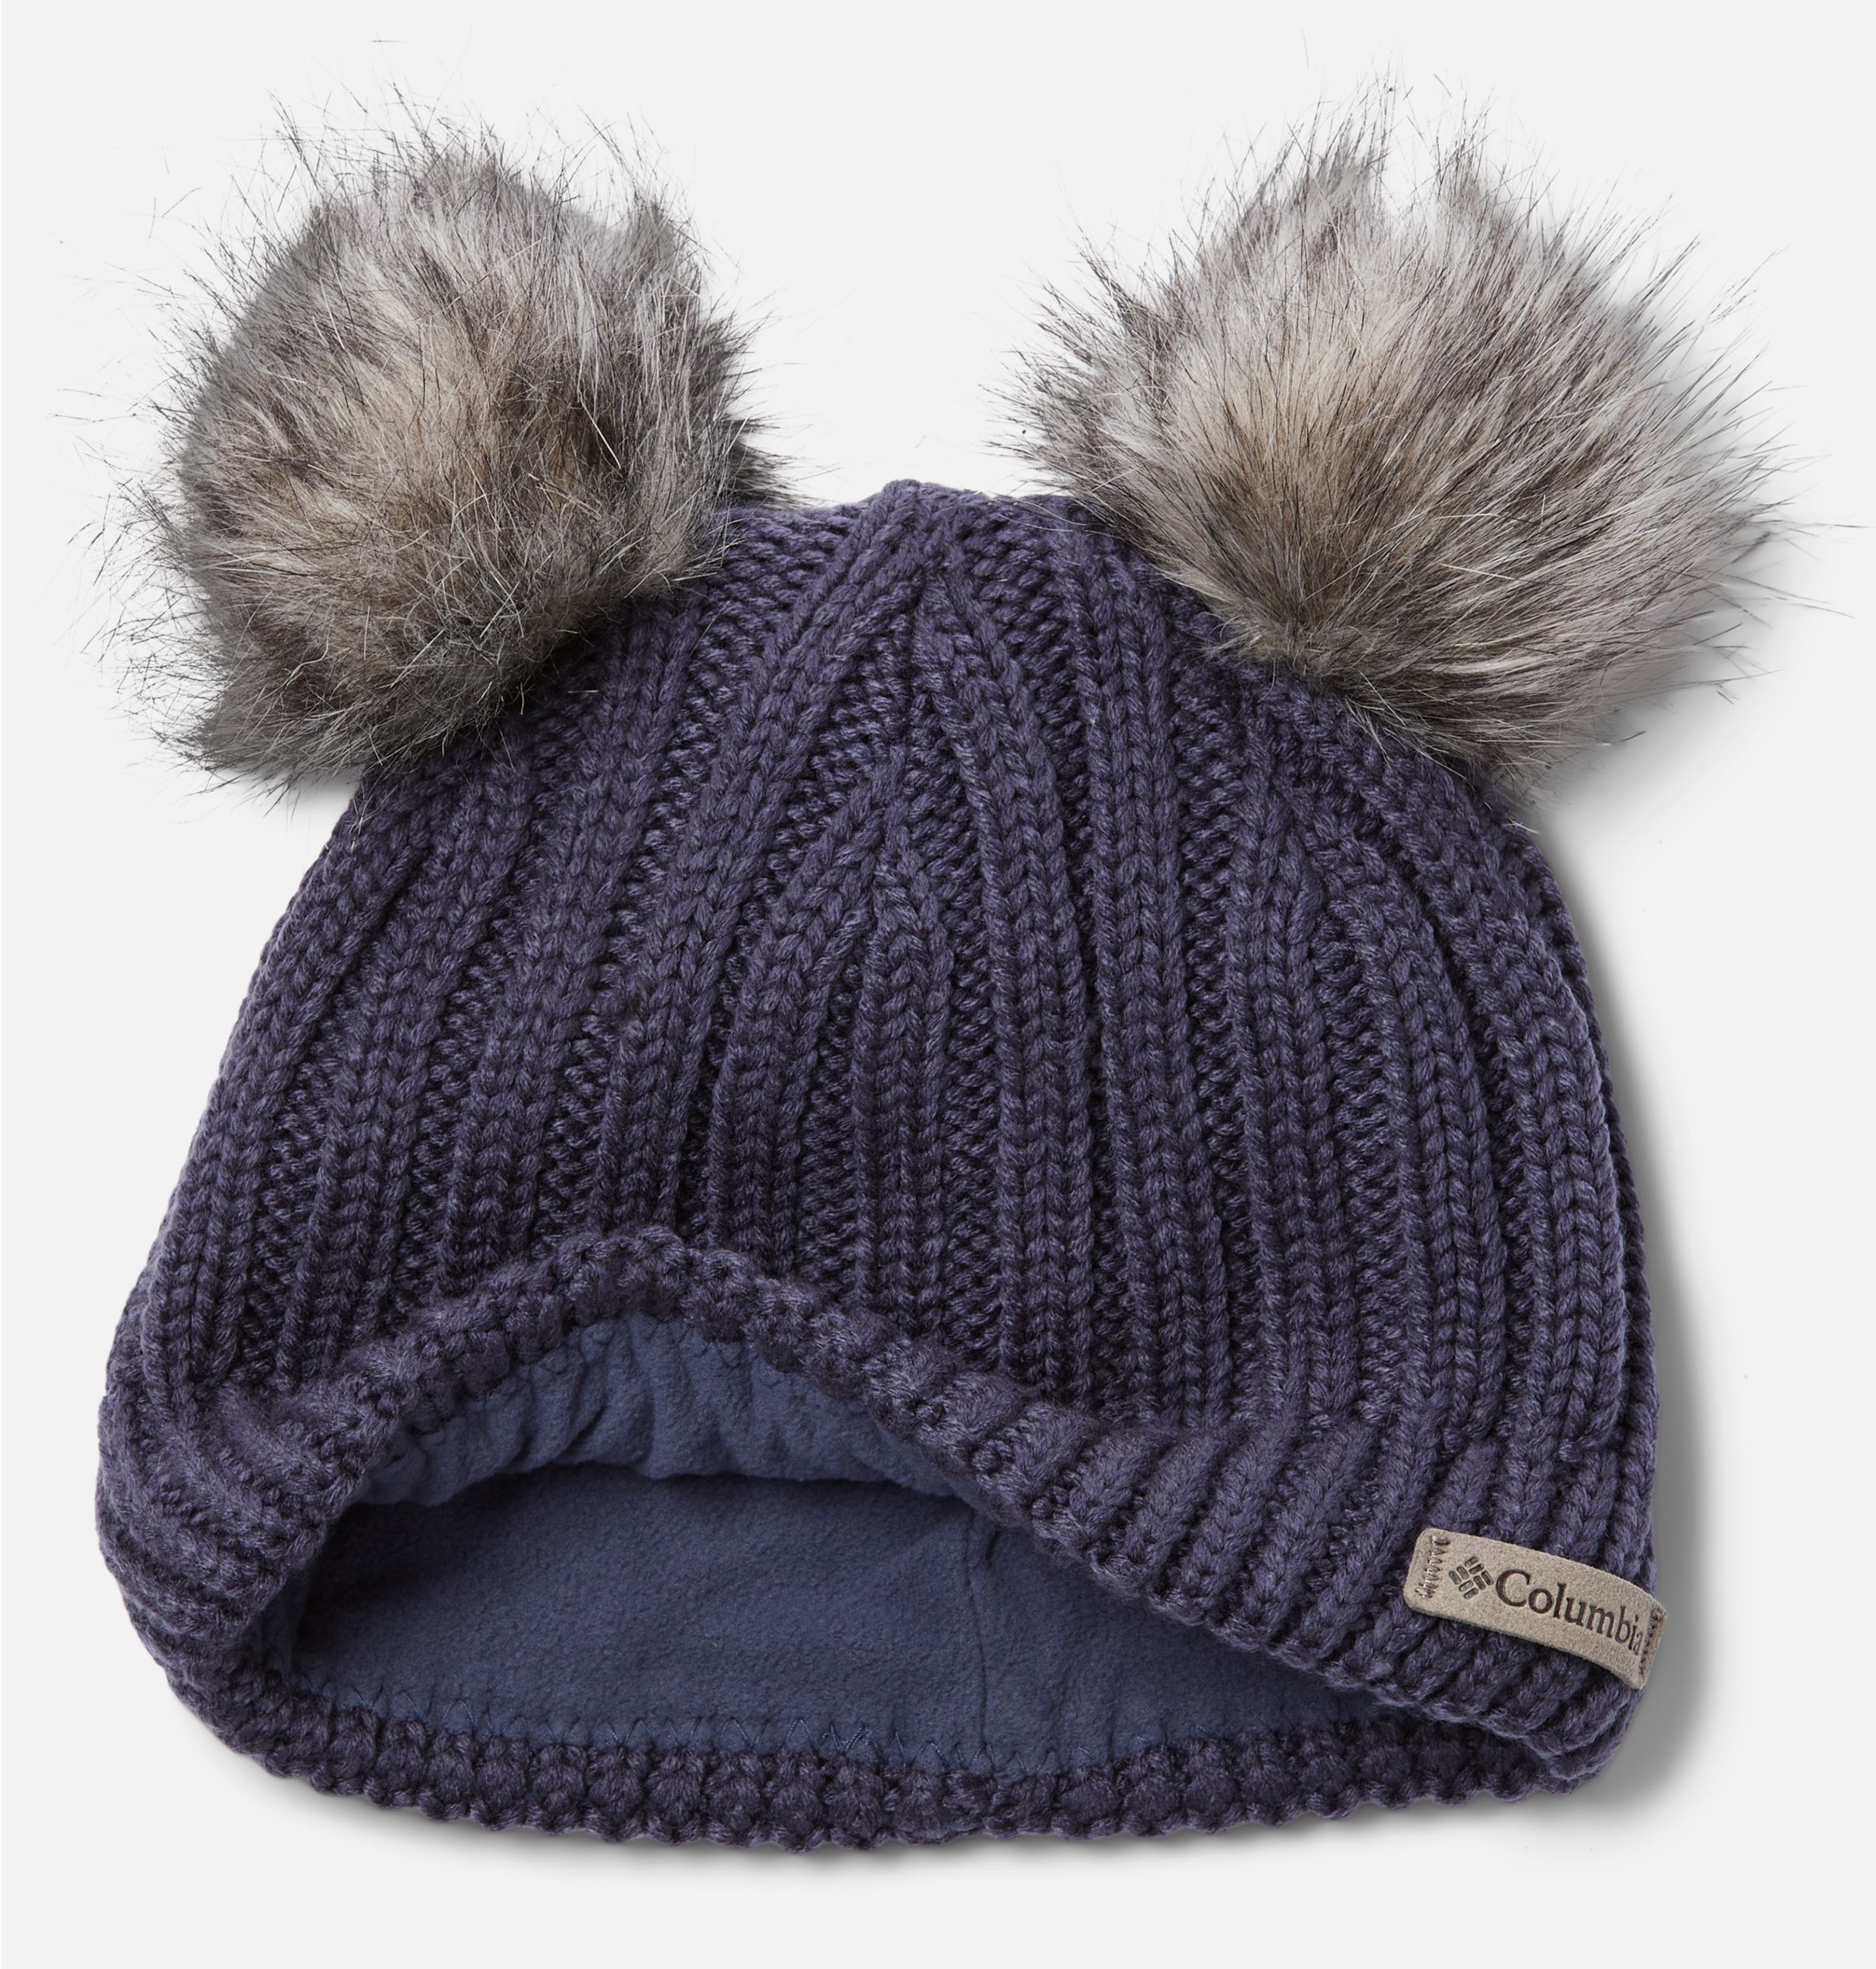 Columbia youth winter hat